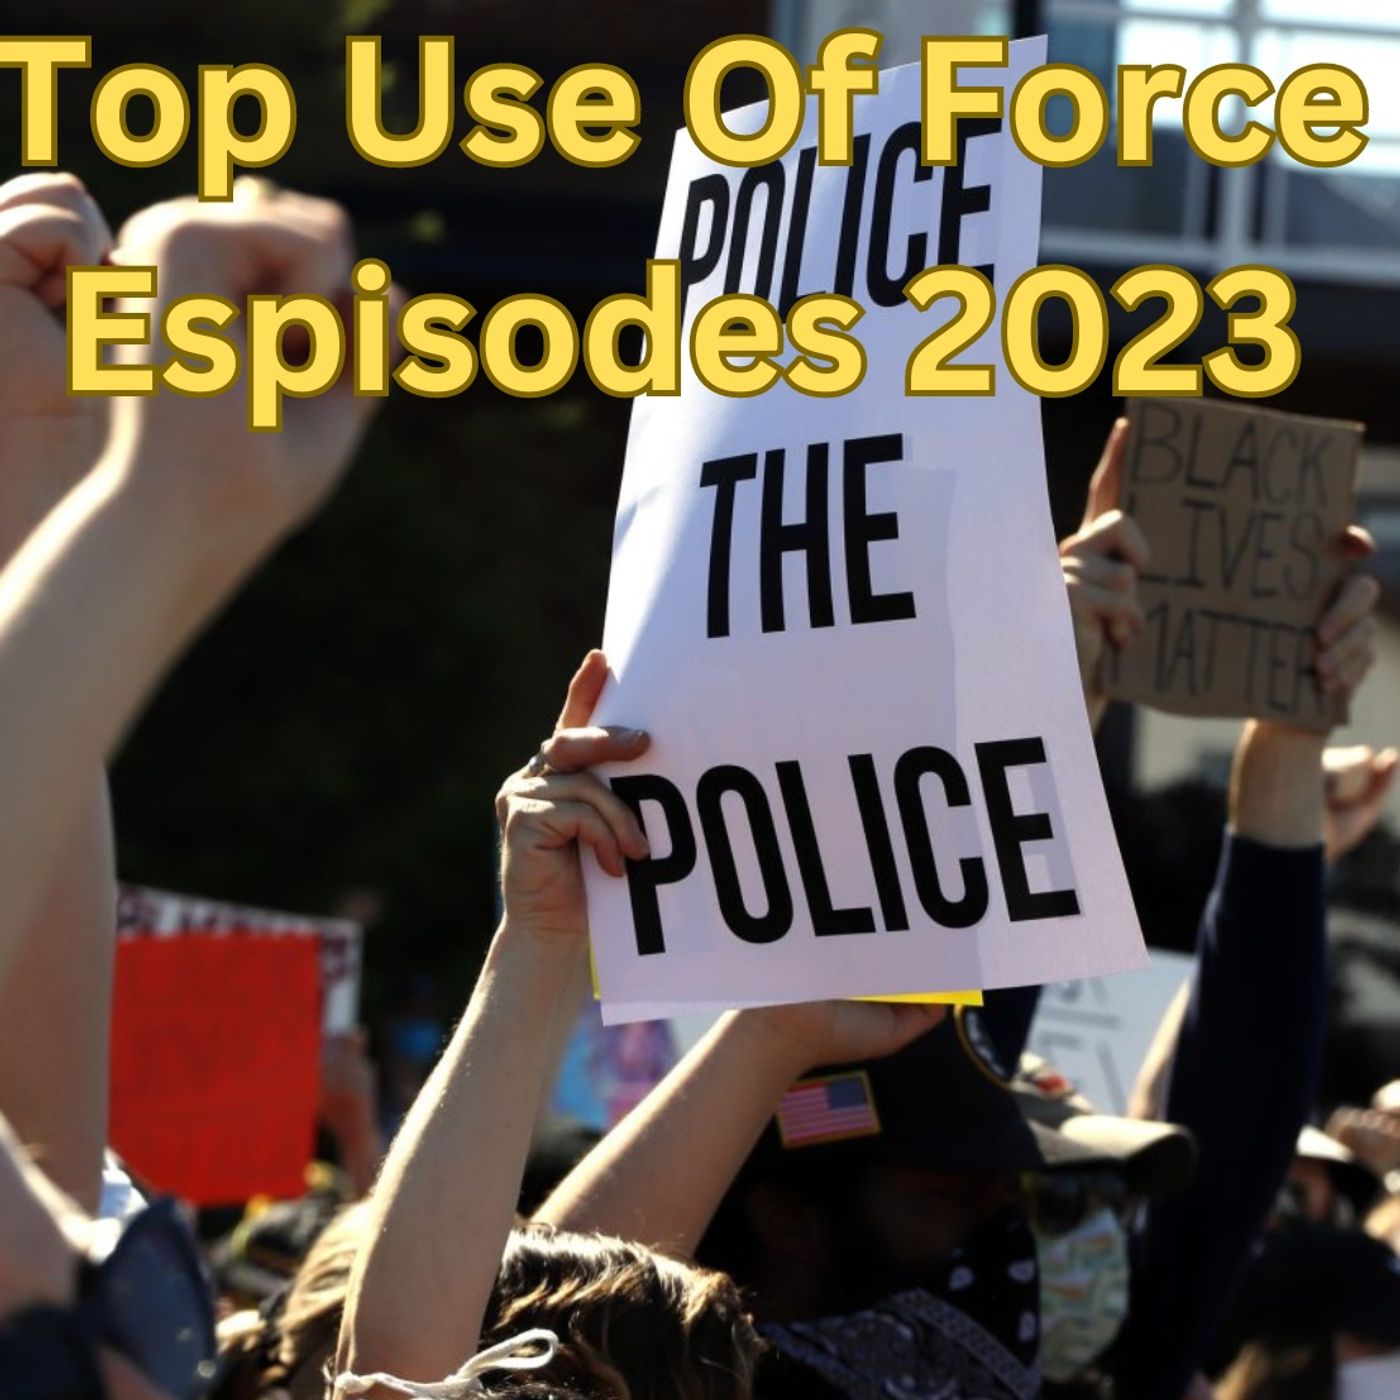 Top Use Of Police Force Episodes 2023